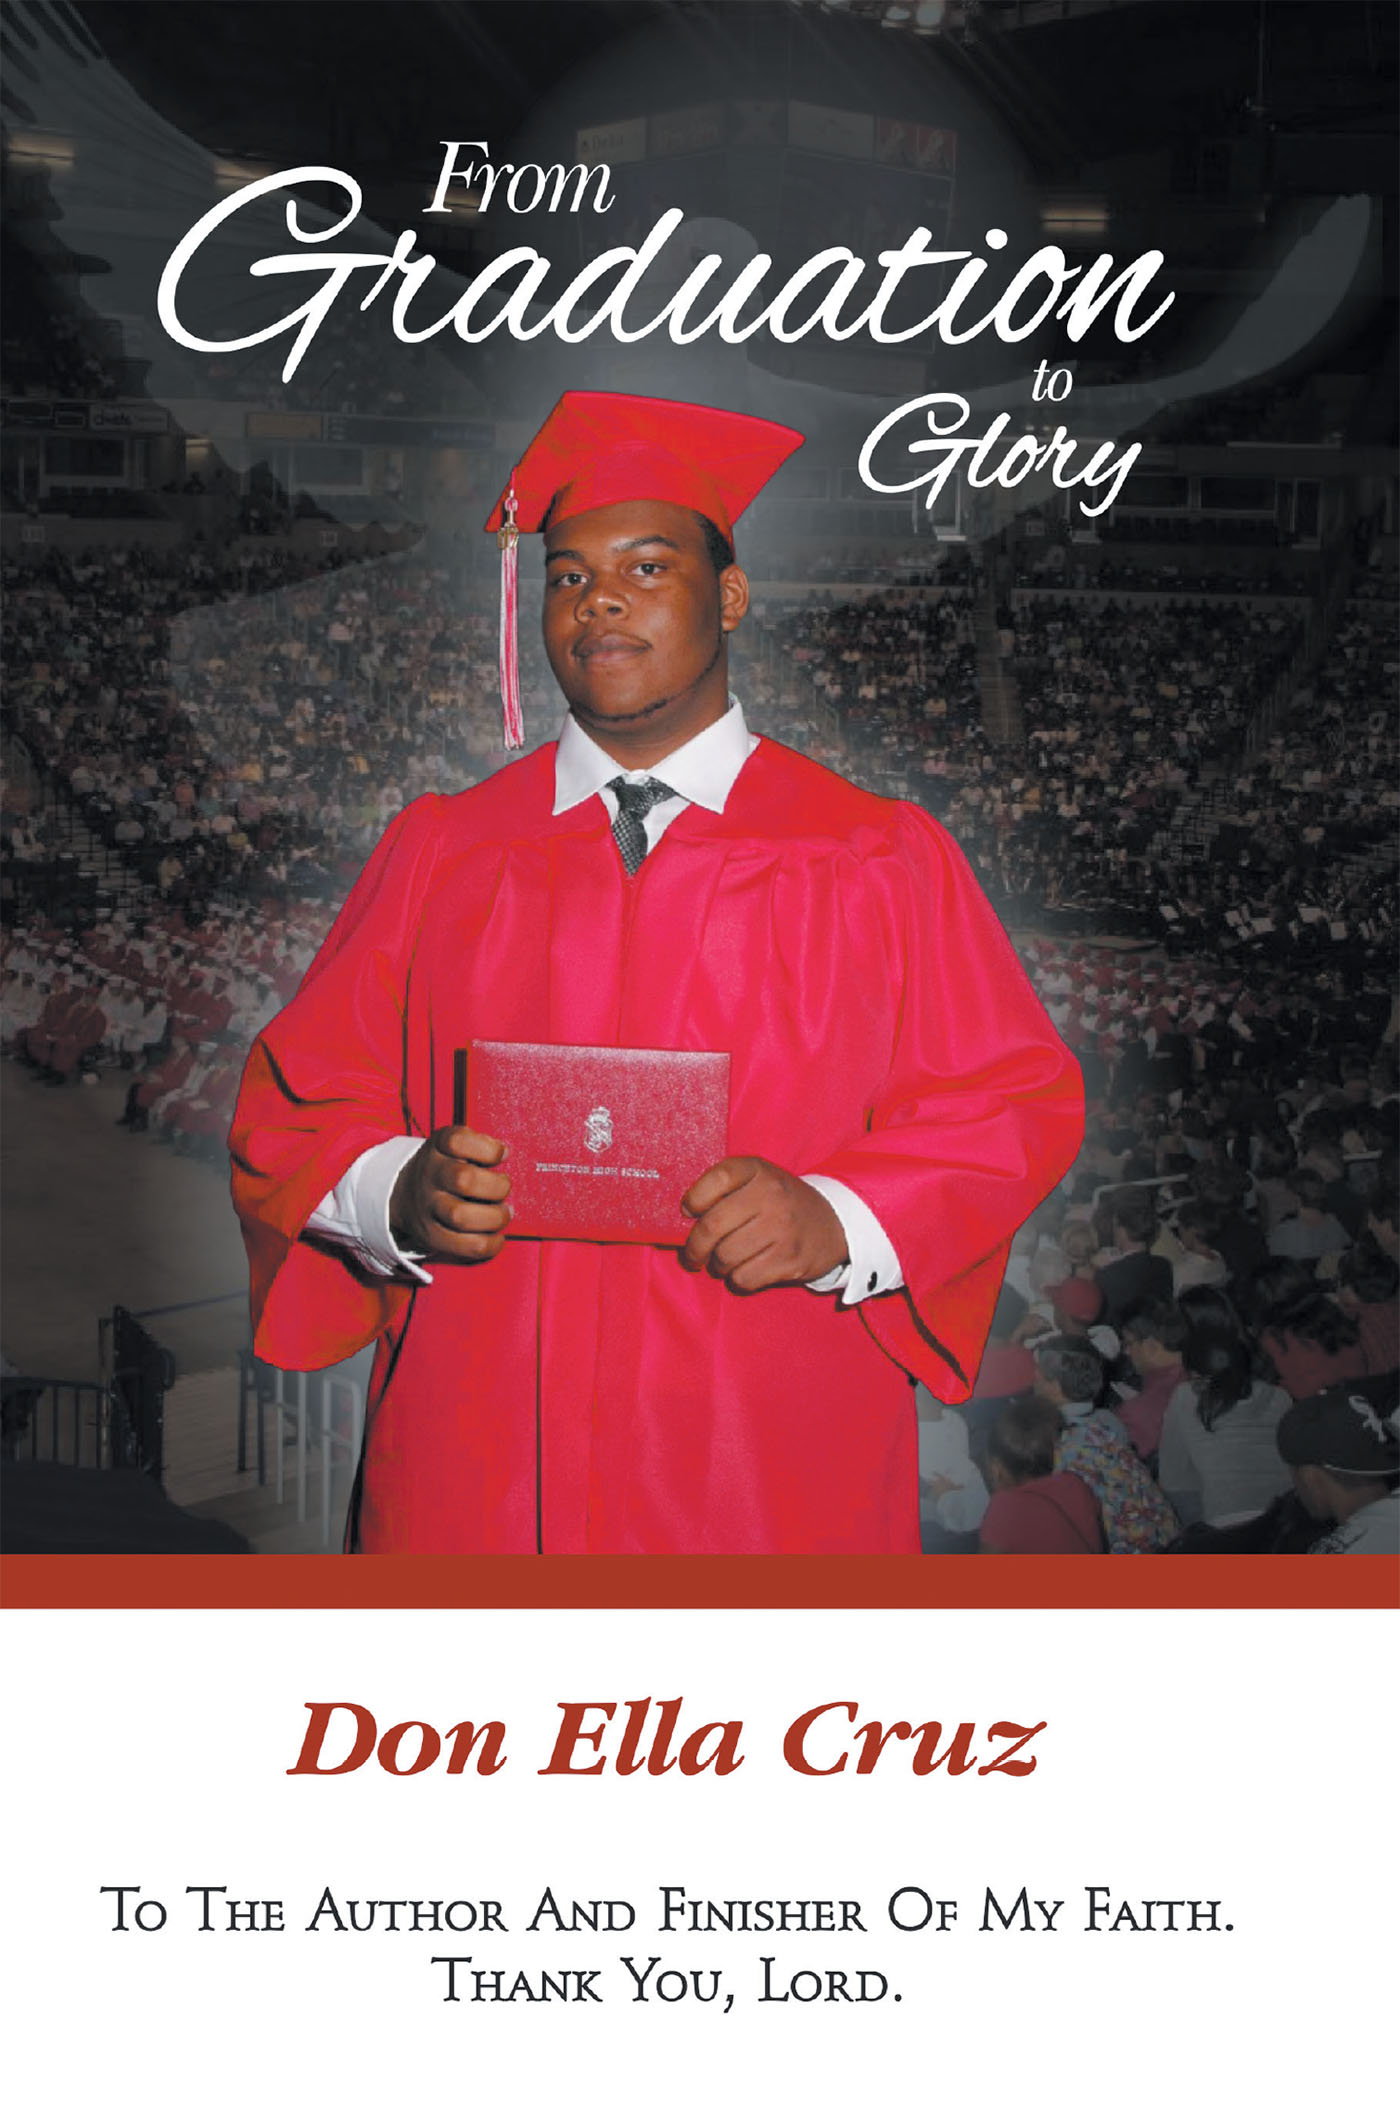 Don Ella Cruz’s Newly Released "From Graduation to Glory" is a Powerful Story of Family and Faith as Witnessed Through the Eyes of a Dedicated Mother